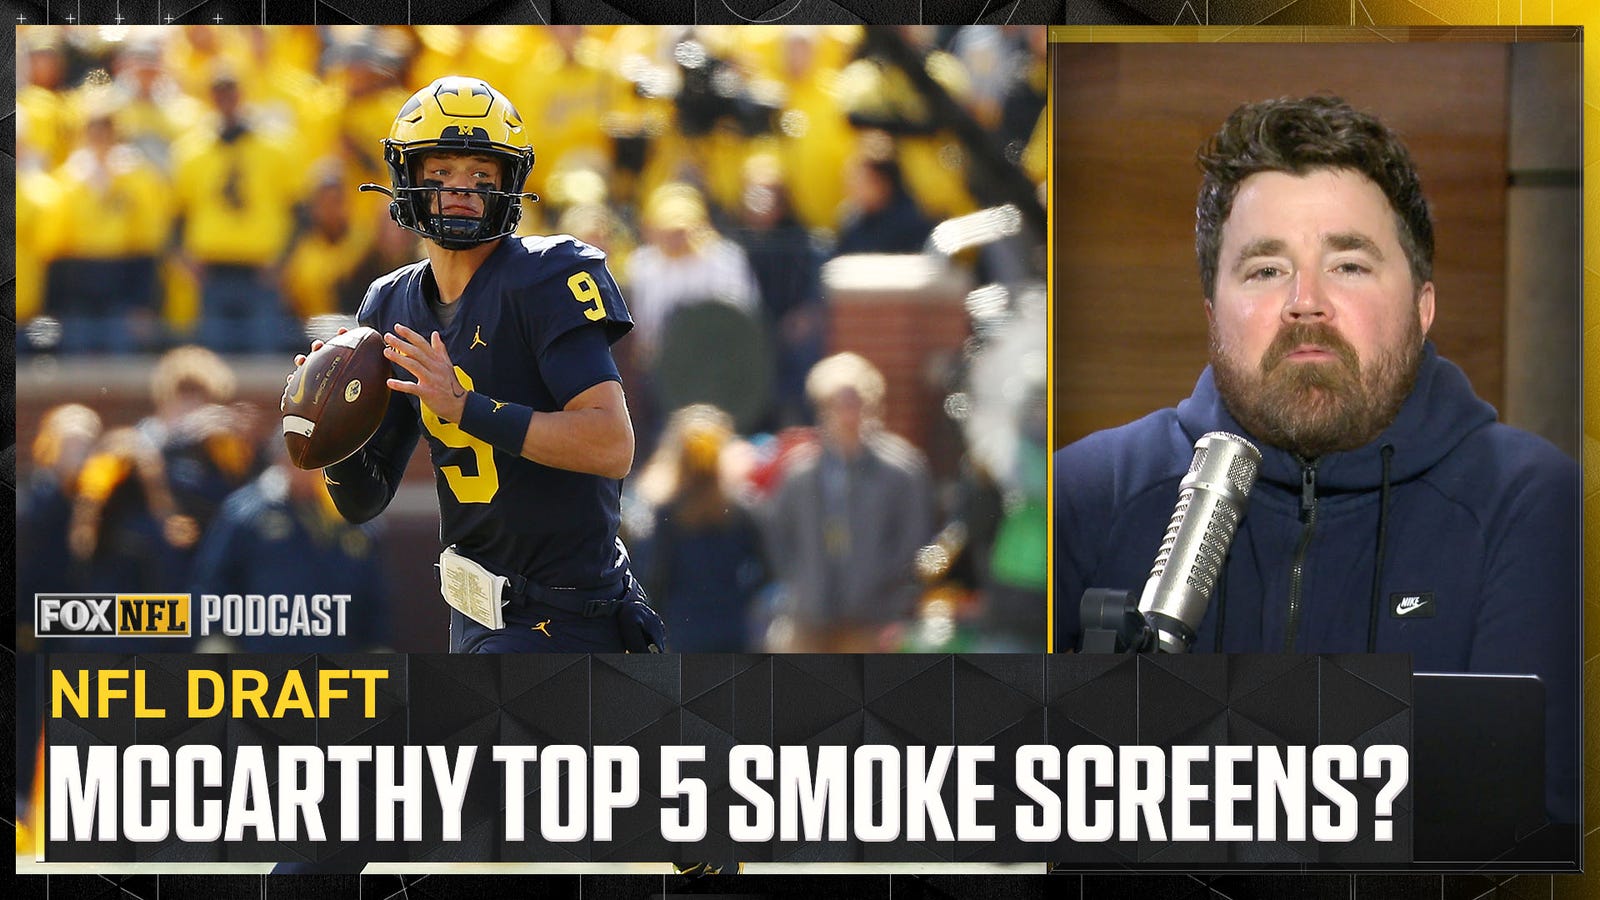 Is J.J. McCarthy going top five a smoke screen for other NFL teams?